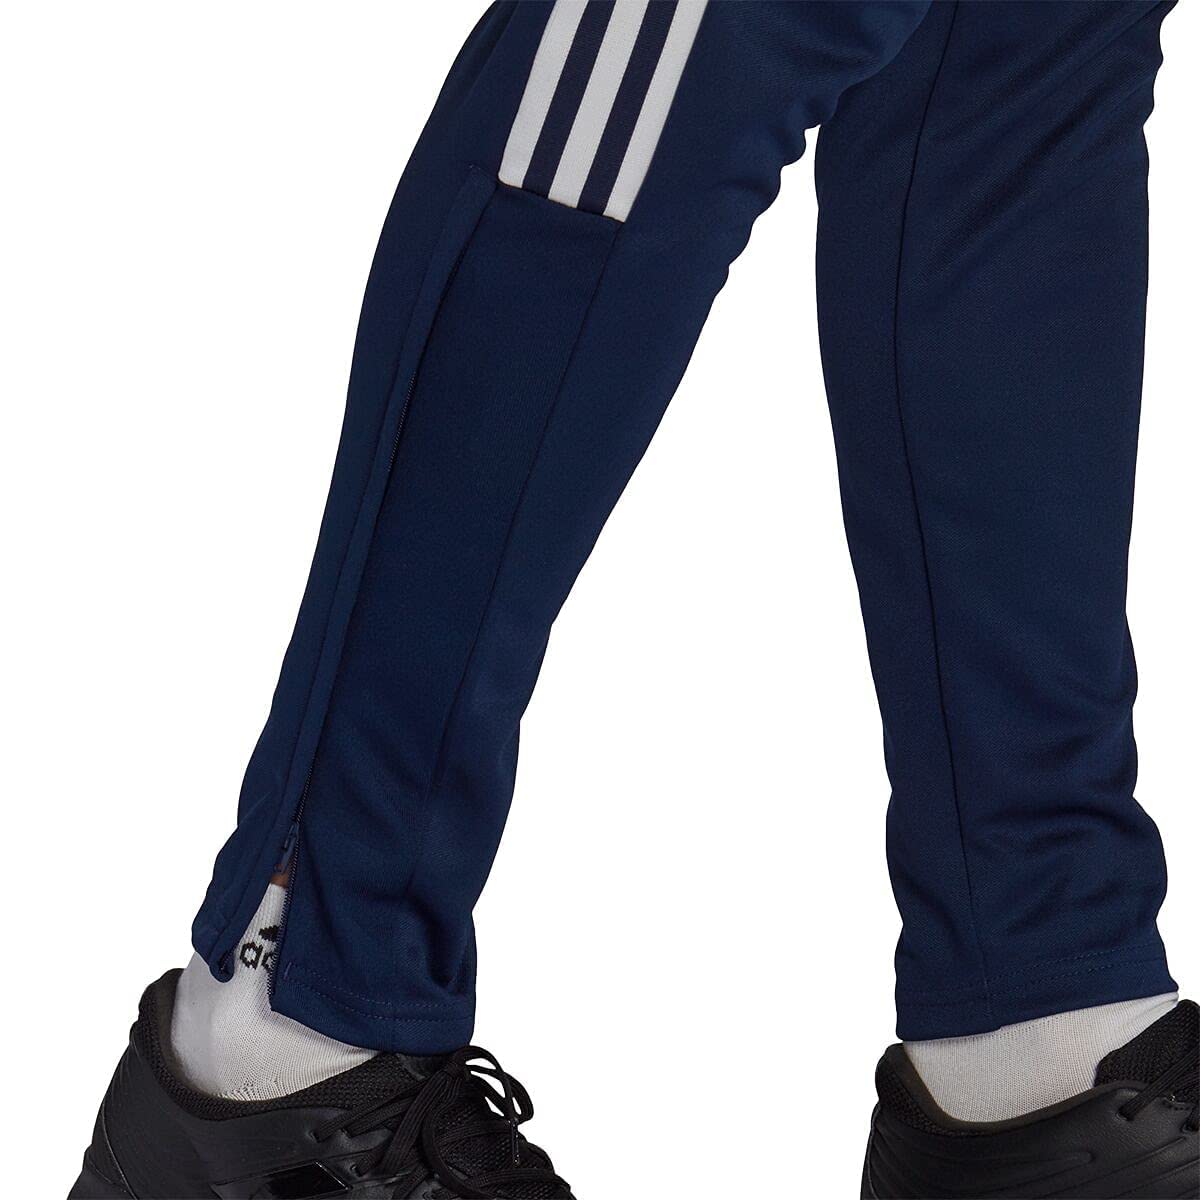 ADIDAS KIDS FOOTBALL PANTS YOUTH SLIM FIT TAPERED TRACKSUIT TRAINING PANTS  NAVY | eBay